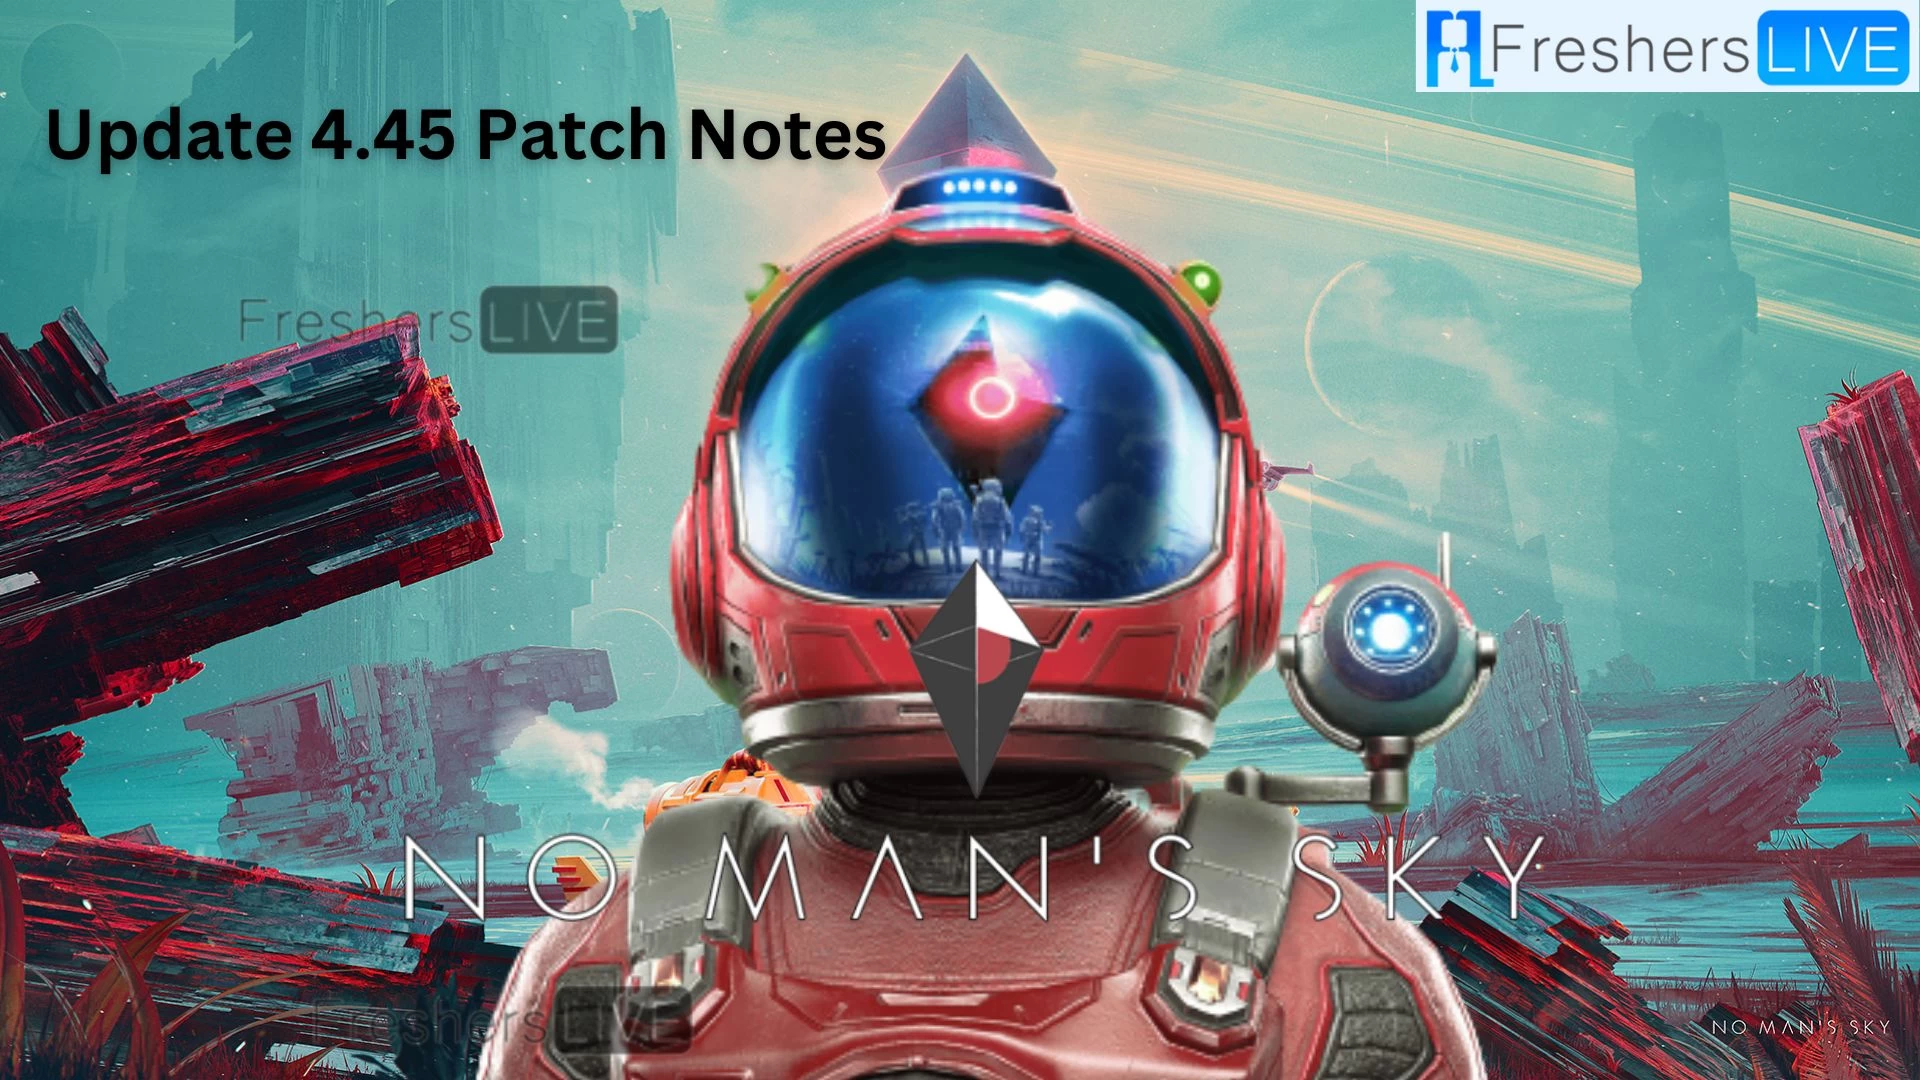 No Man's Sky Update 4.45 Patch Notes, Gameplay, Release, Plot and More